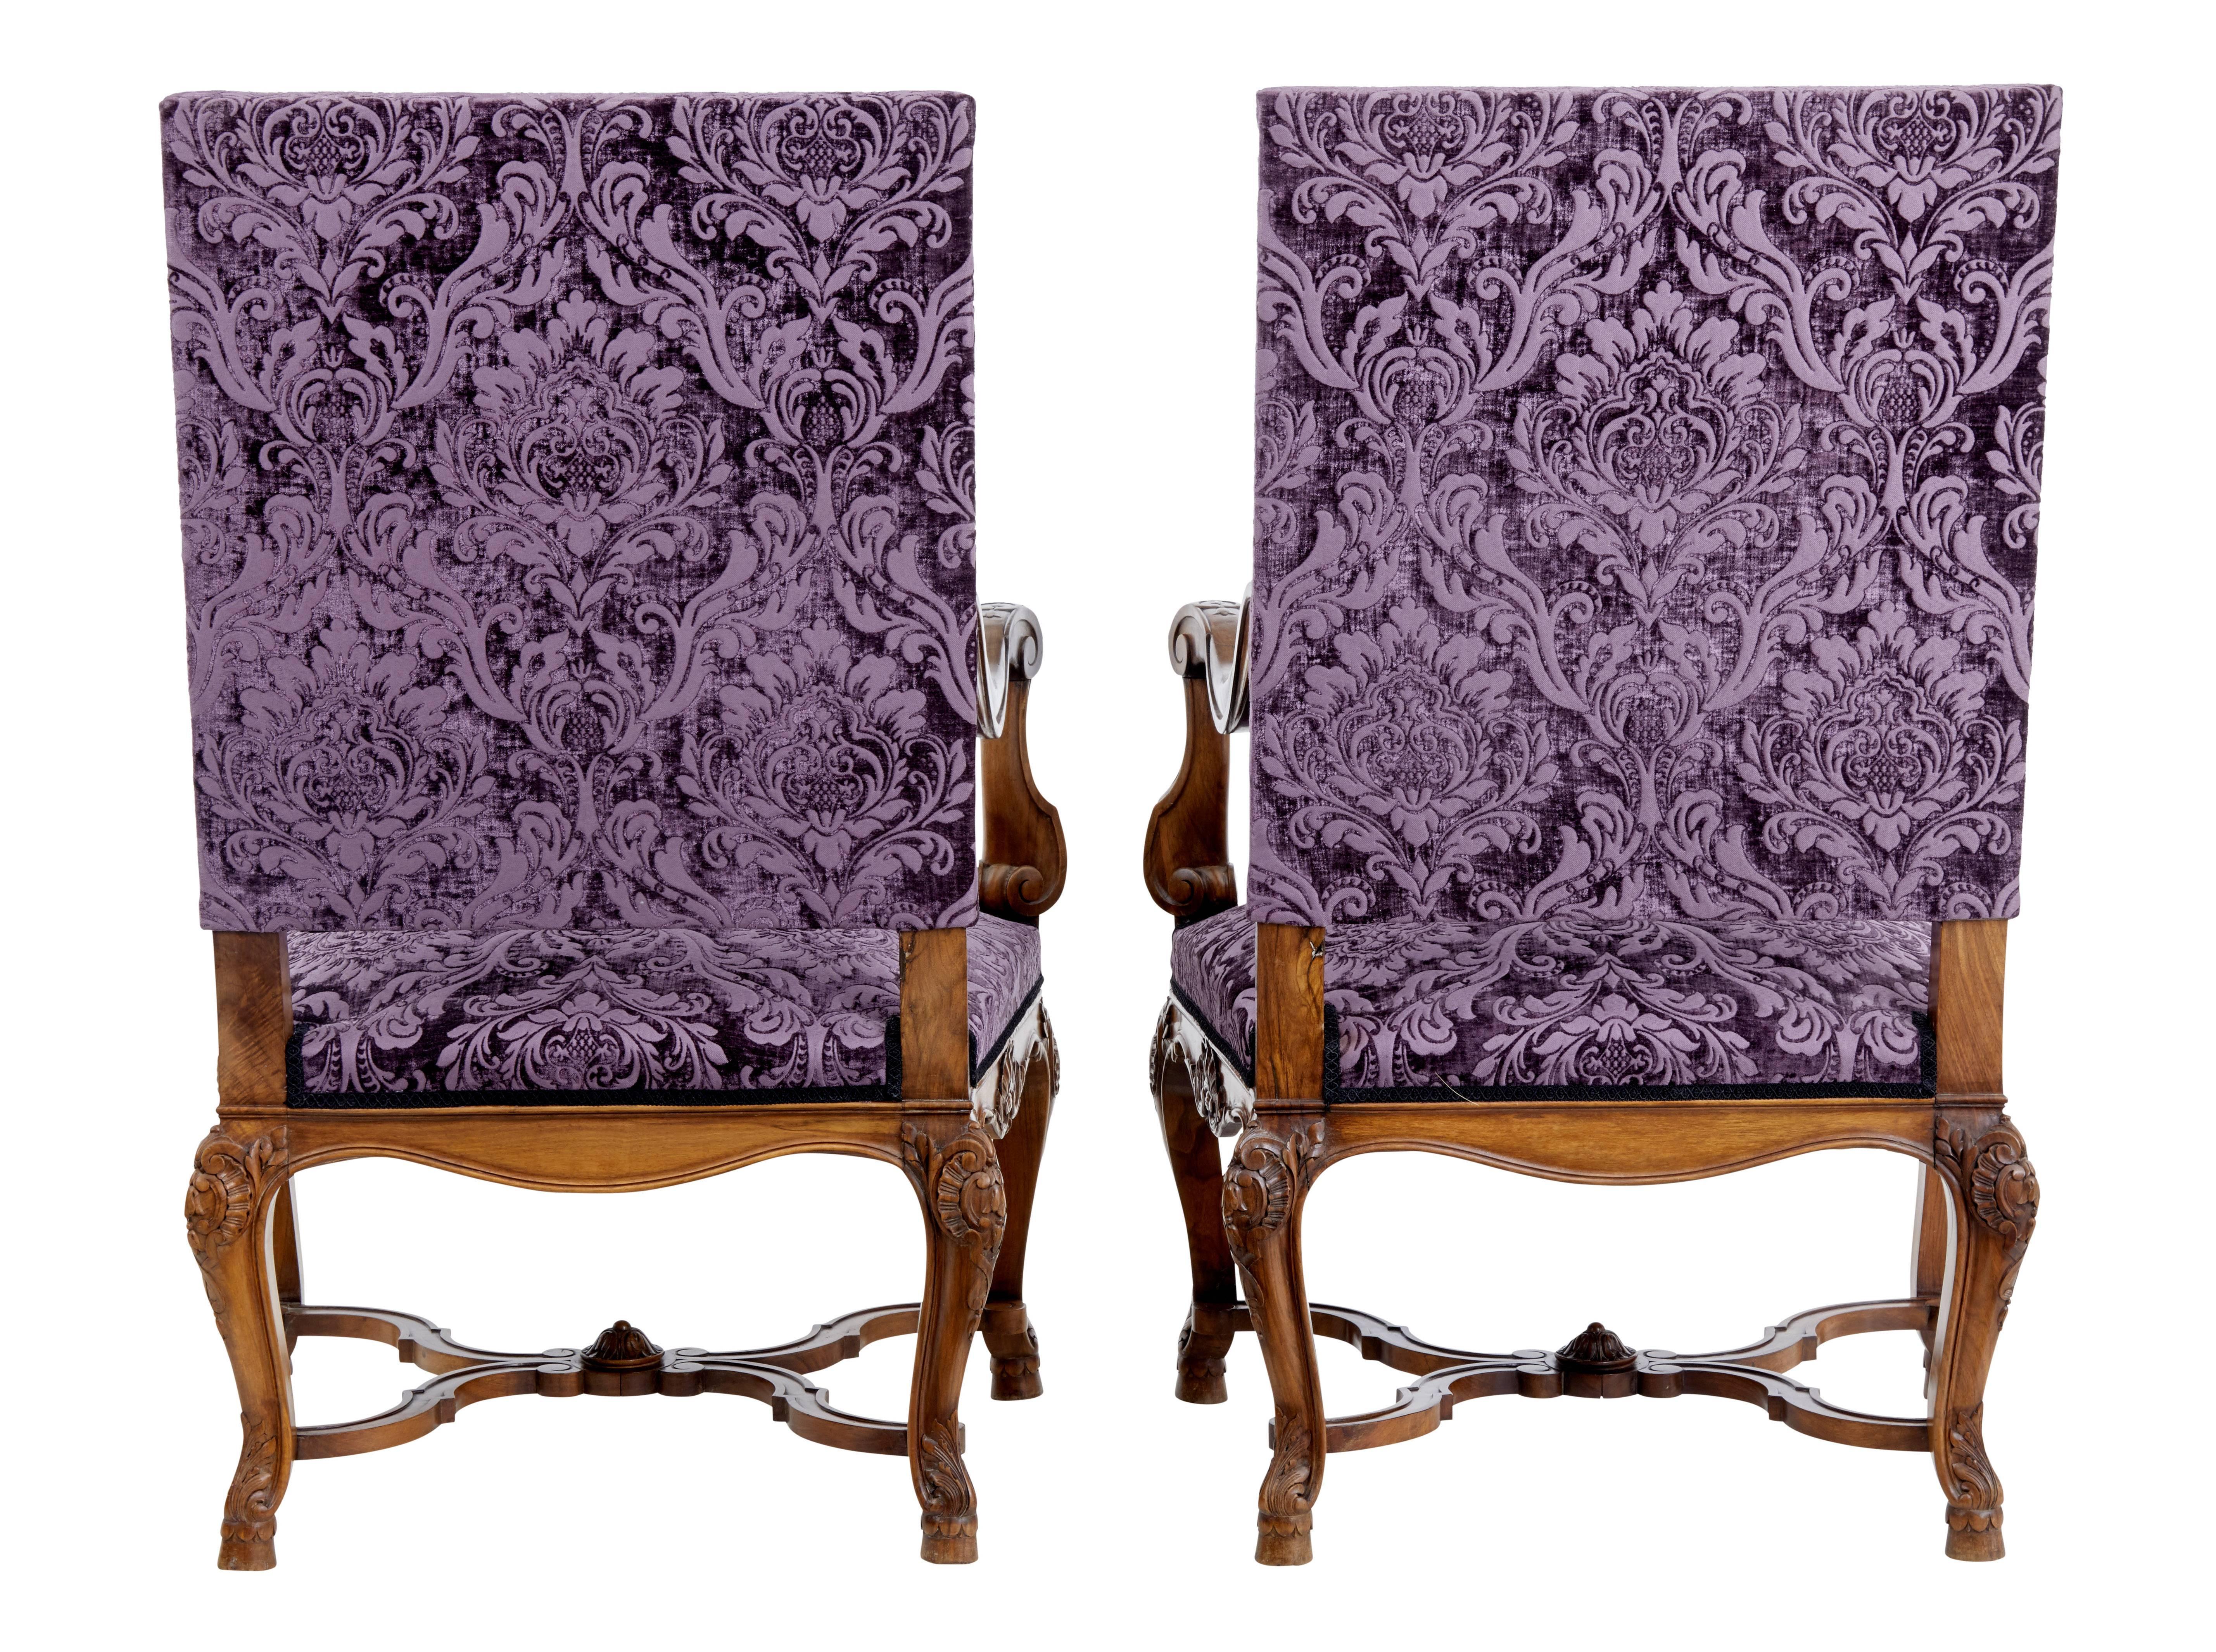 Carved Pair of 19th Century French Walnut Art Nouveau Armchairs